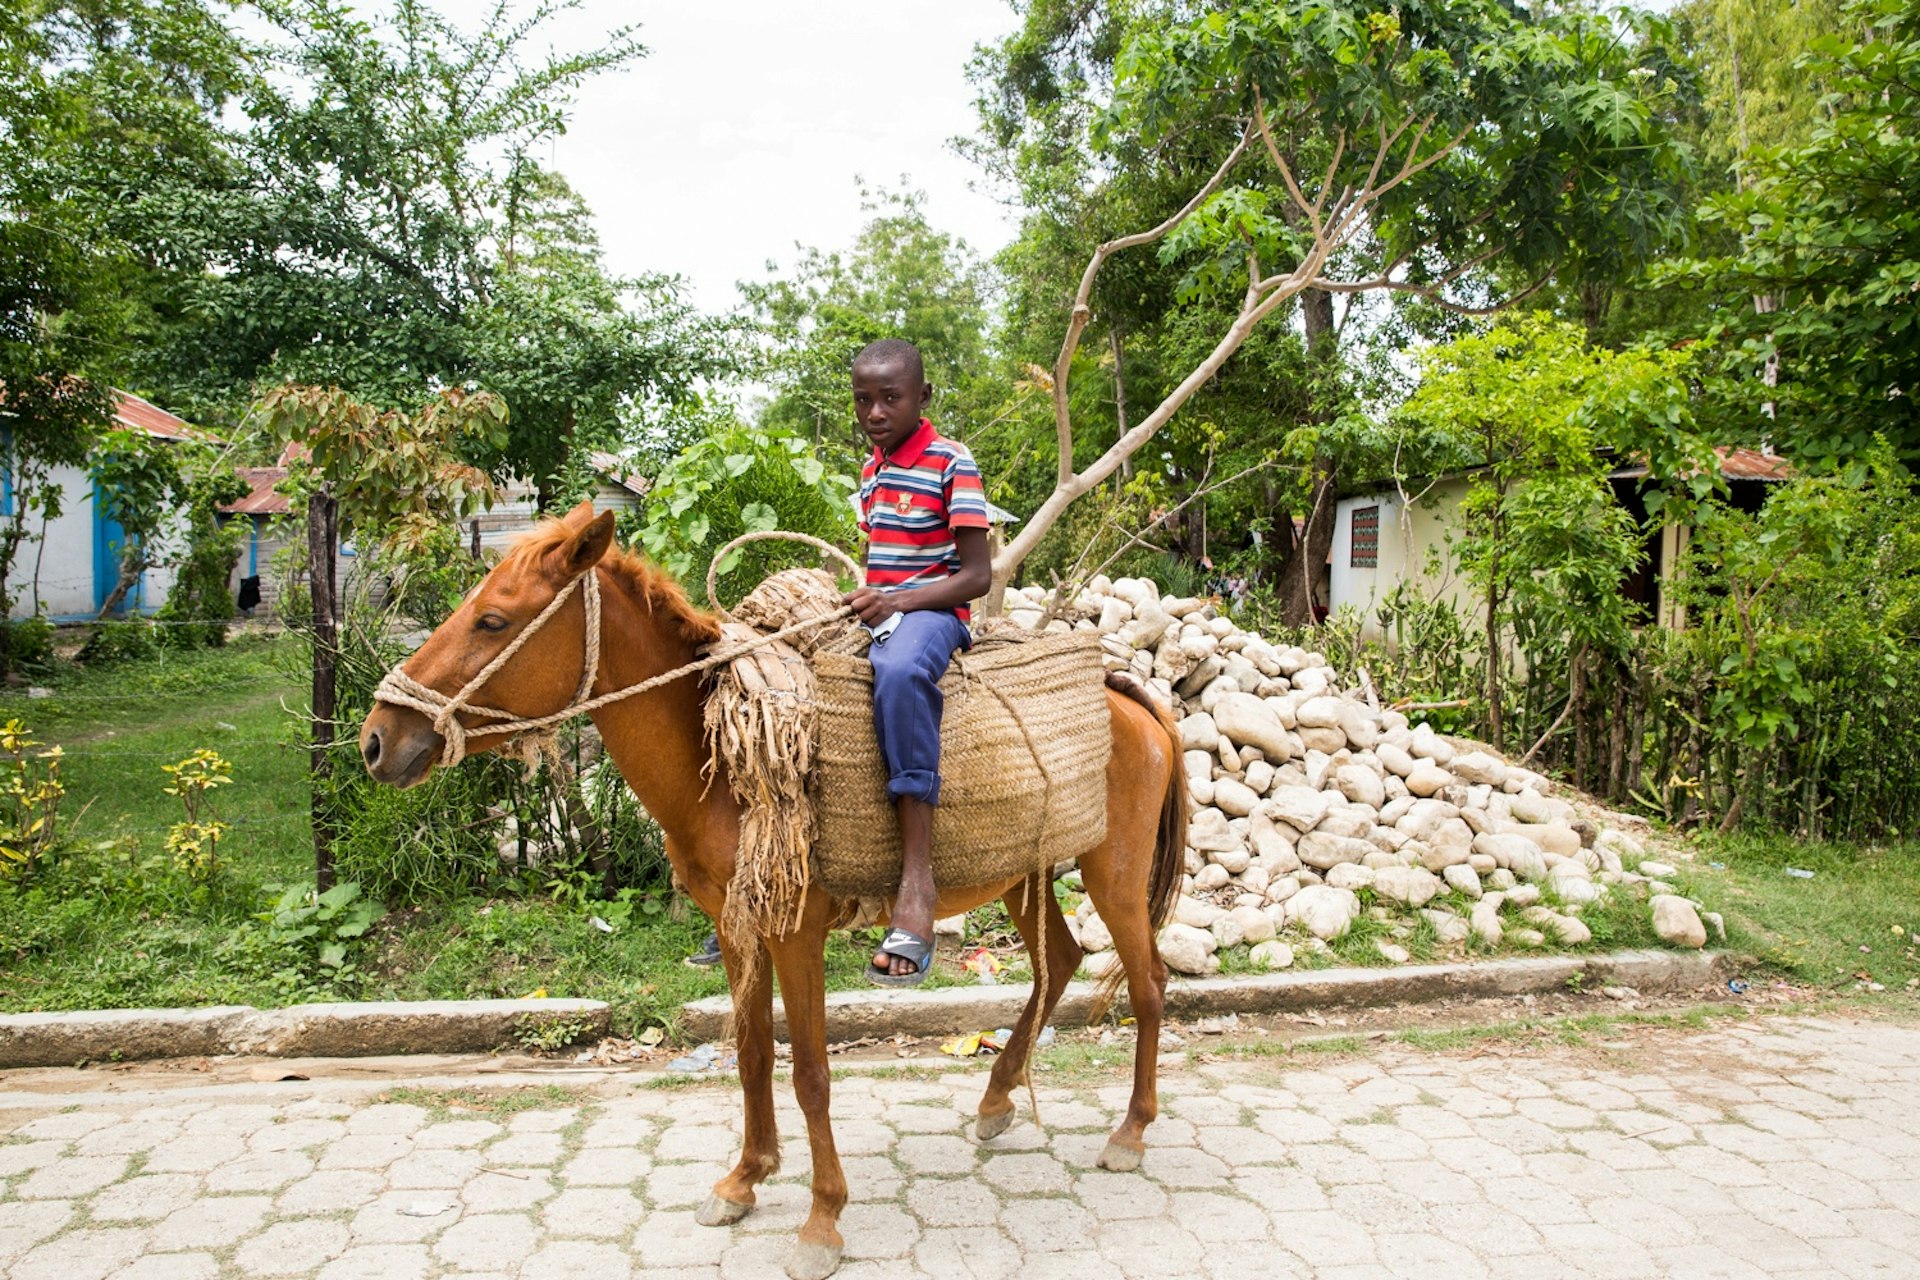 A young farmer on his horse in Central Plateau. Central Plateau is one of the poorest areas of Haiti. It borders the Dominican and most of this land is rural and off the grid.